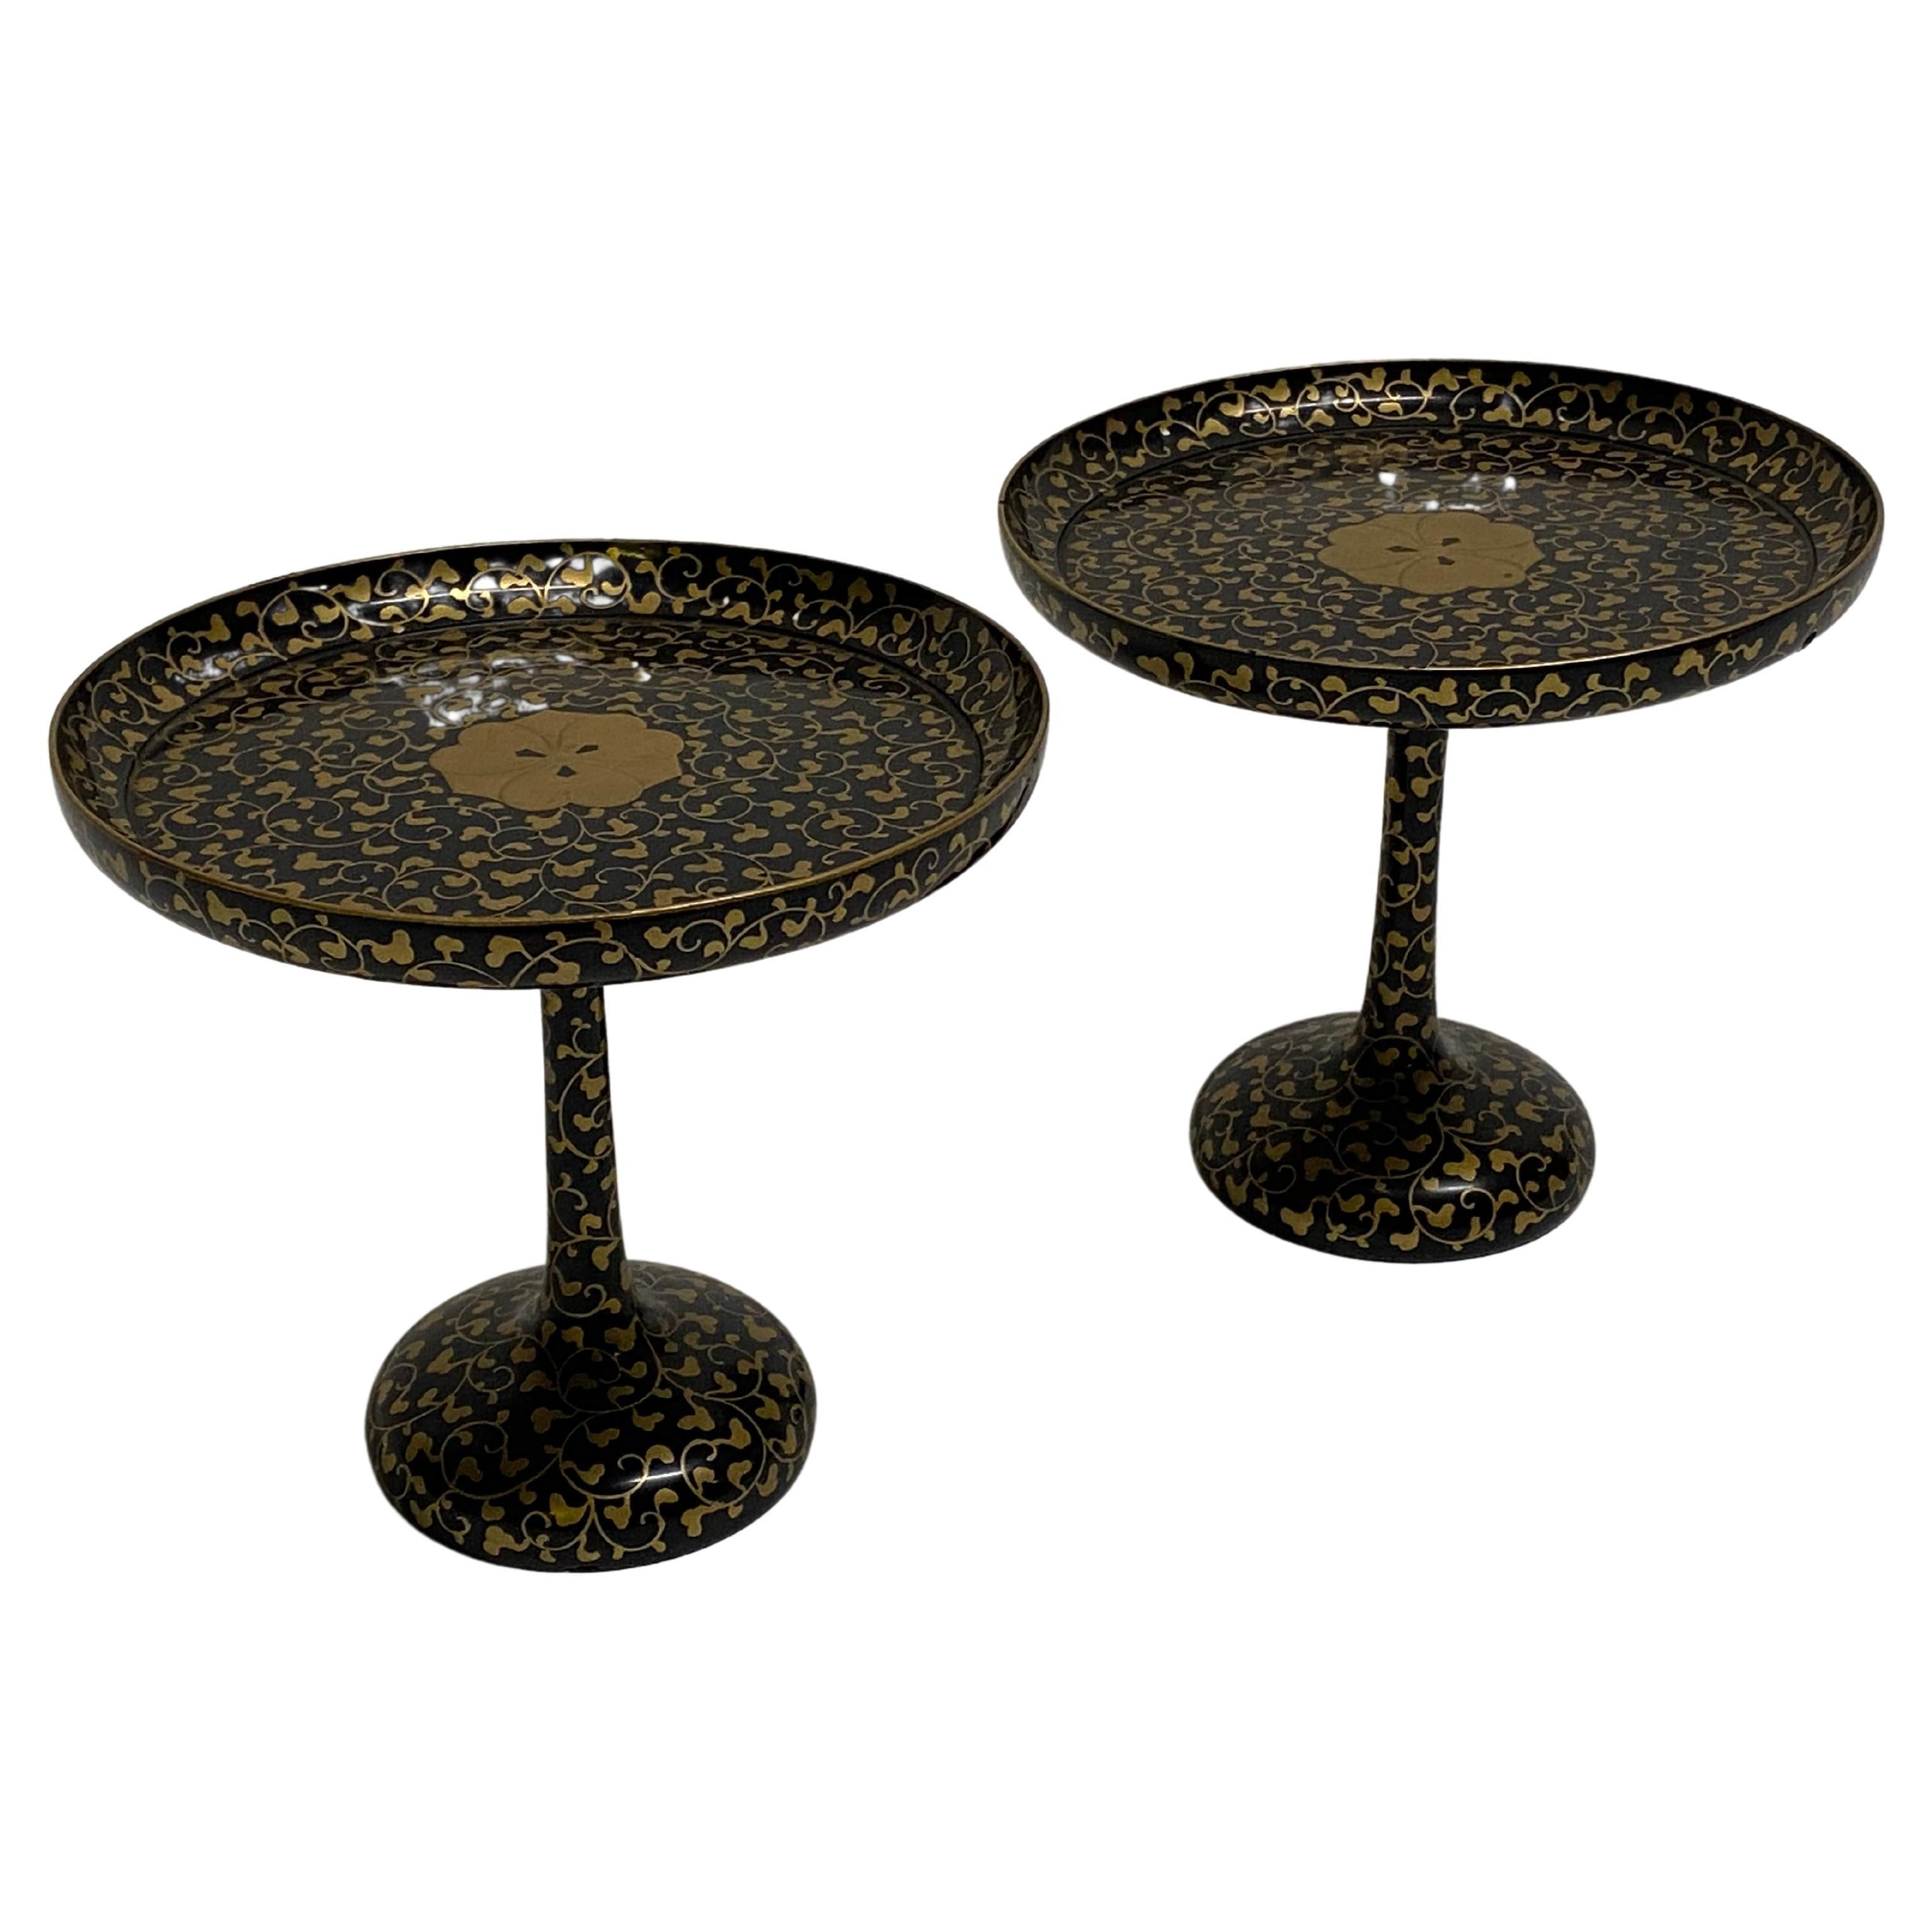 Asian Black Lacquerware and Gold Tazzas, A Pair For Sale